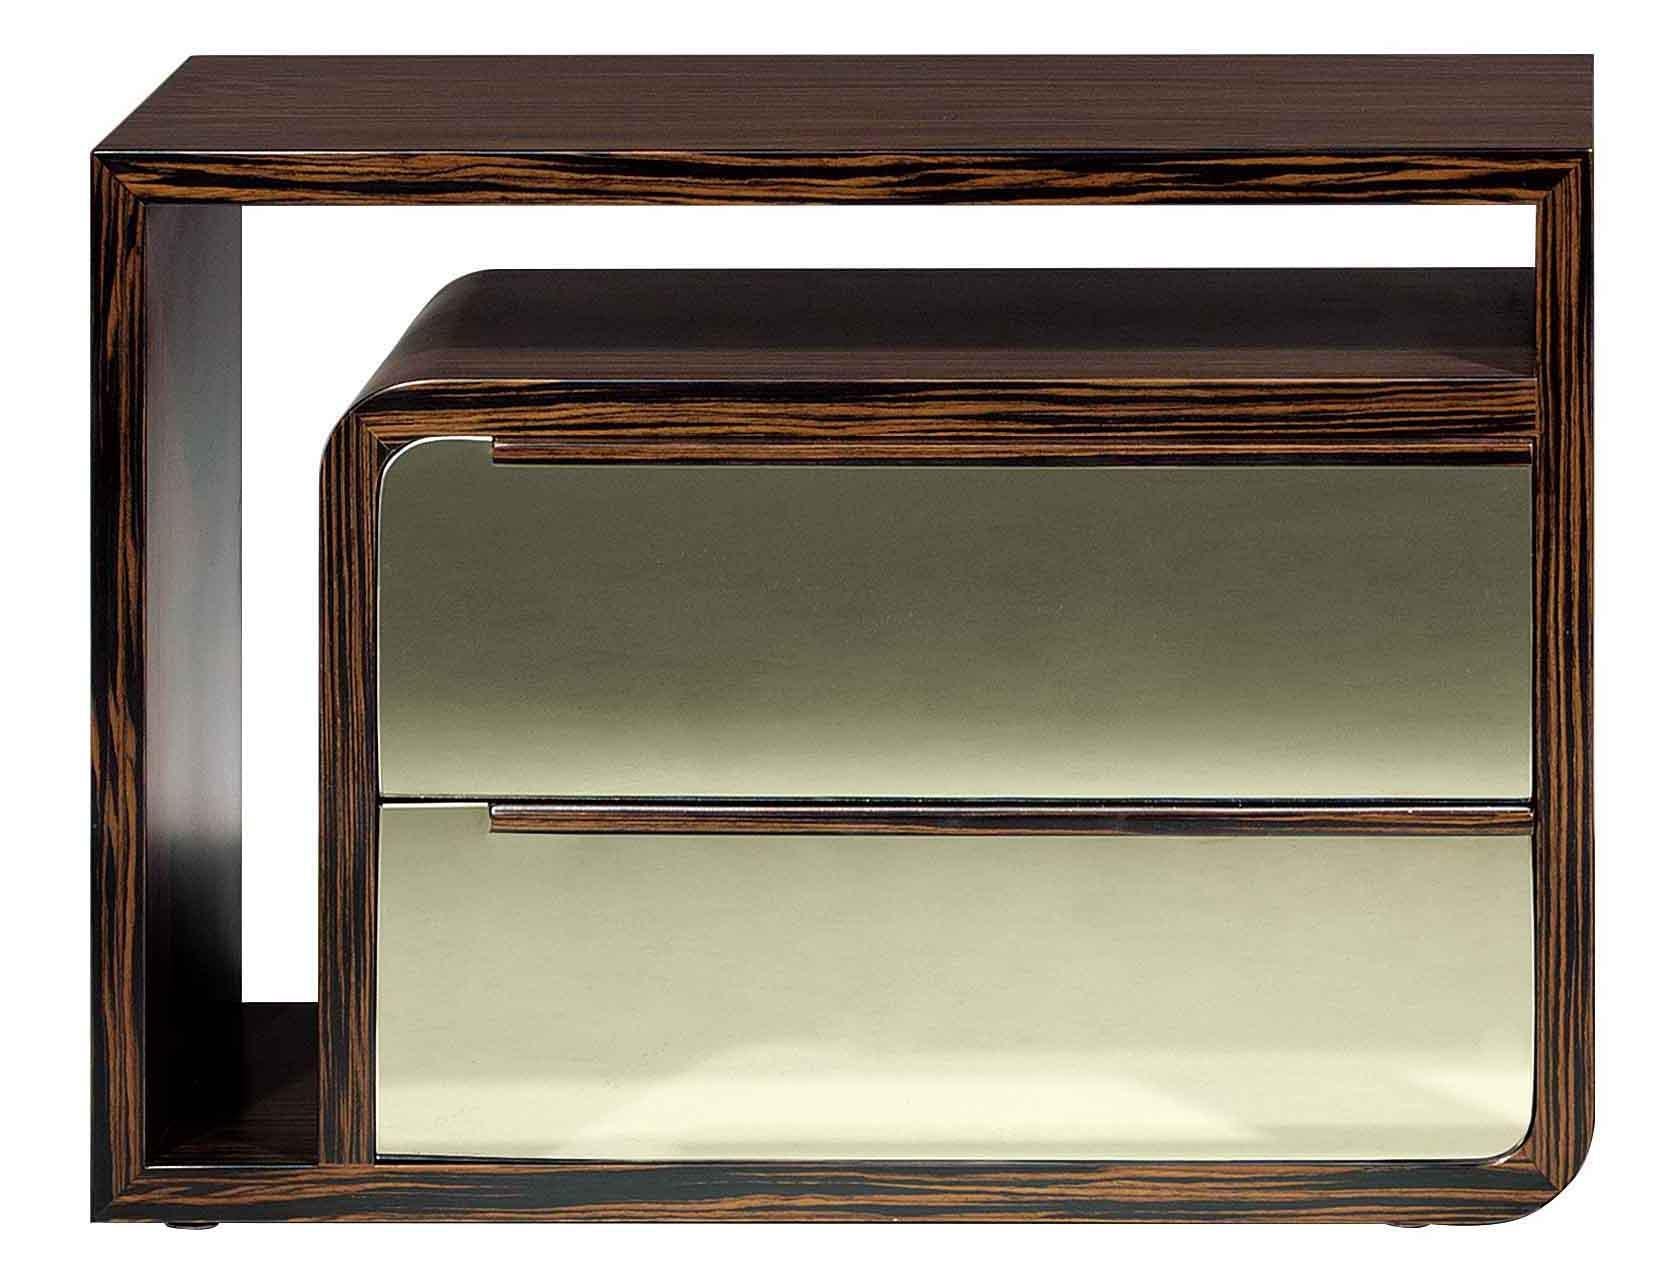 Rose bedside or support table in ebony with two mirrored drawers (regular/ grey, gold /bronze).

Bespoke / customizable
Identical shapes with different sizes and finishings.
All RAL colors available. (Mate / Half Gloss / Gloss).
   